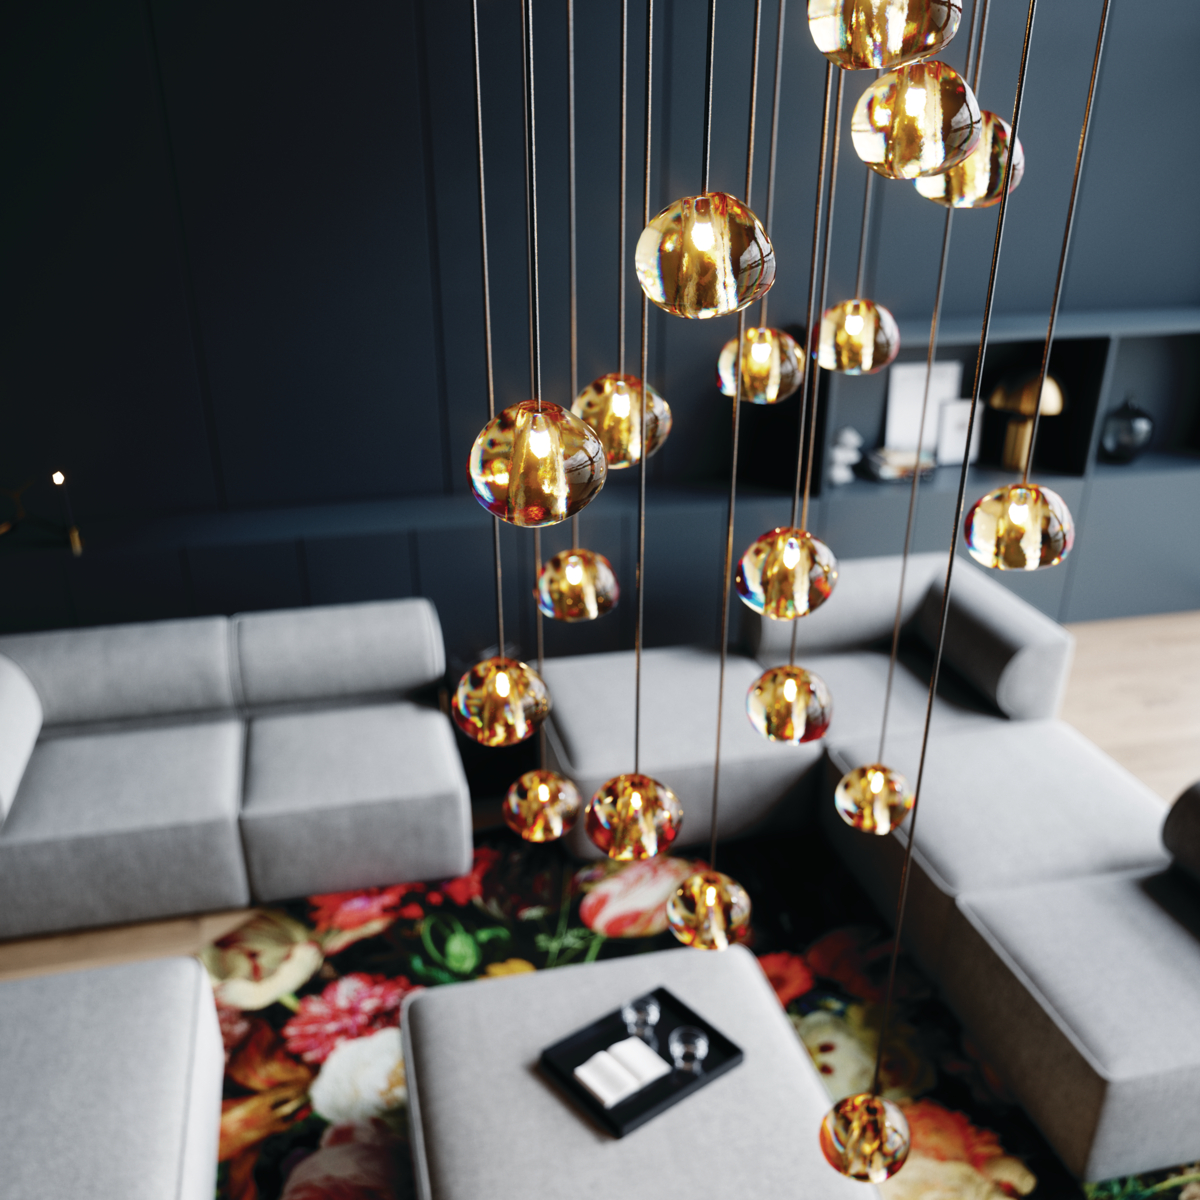 Gold globe lighting shot from above, over flower rug and gray sectional sofa